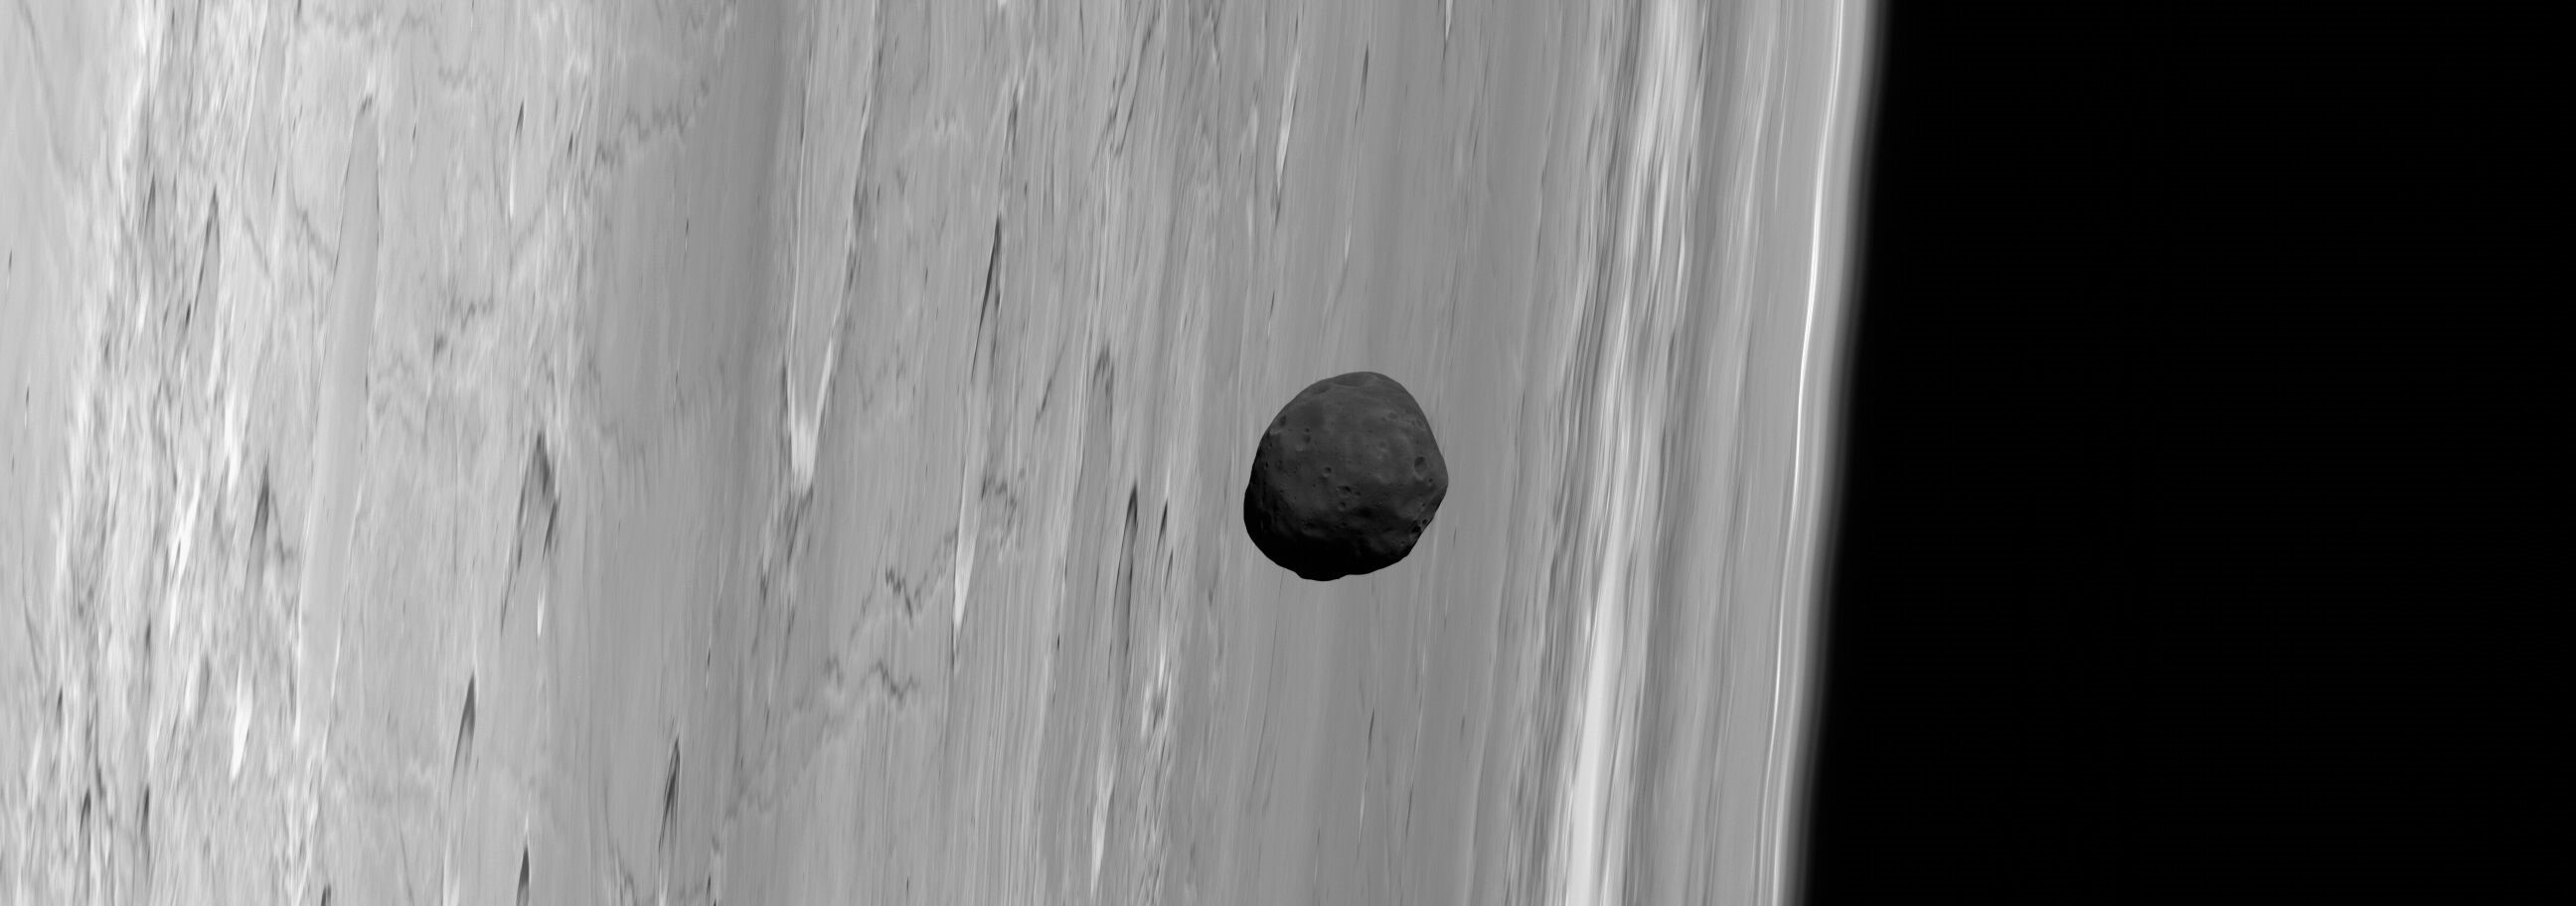 Phobos, the larger of Mars’ two tiny satellites, is the darkest moon in the solar system. This dark aspect inspired the hypothesis that the close-orbiting moon may be a captured asteroid, but its orbital dynamics seemed to disagree. A new study suggests Phobos’ composition may be more like the volcanic crust of the Red Planet than it appears, consistent with an origin for the moon in an ancient, violent impact on Mars. Credit: G. Neukum (FU Berlin) et al., Mars Express, DLR, ESA; Acknowledgement: Peter Masek